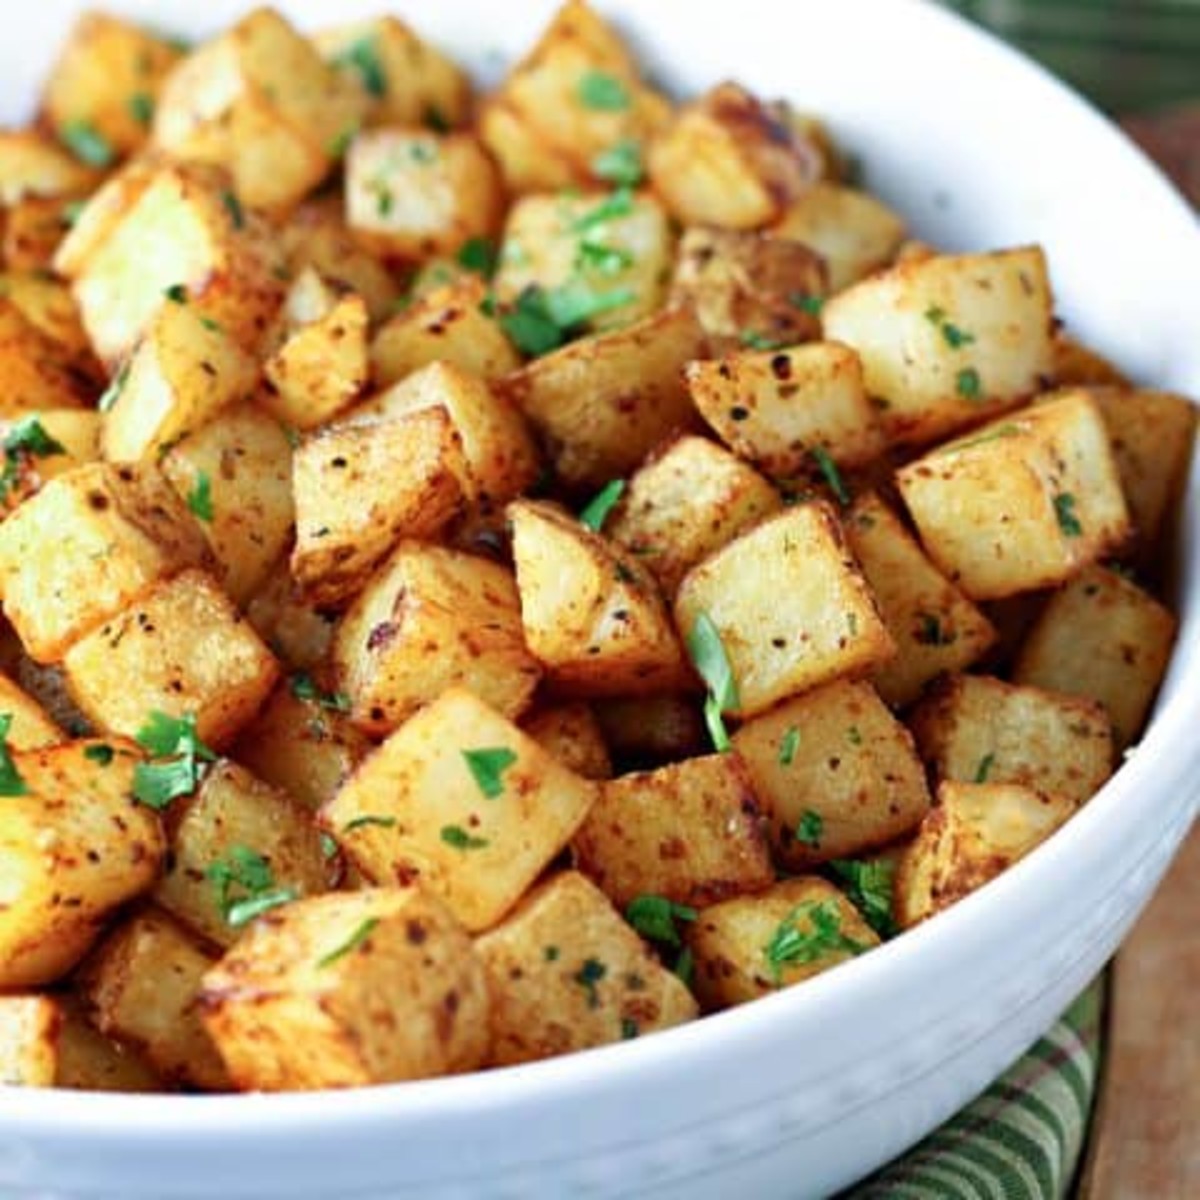 One of the most commonly cooked food item in every household is potatoes. They are often used in almost all households in several meals of the day, and sometimes even in all the meals.